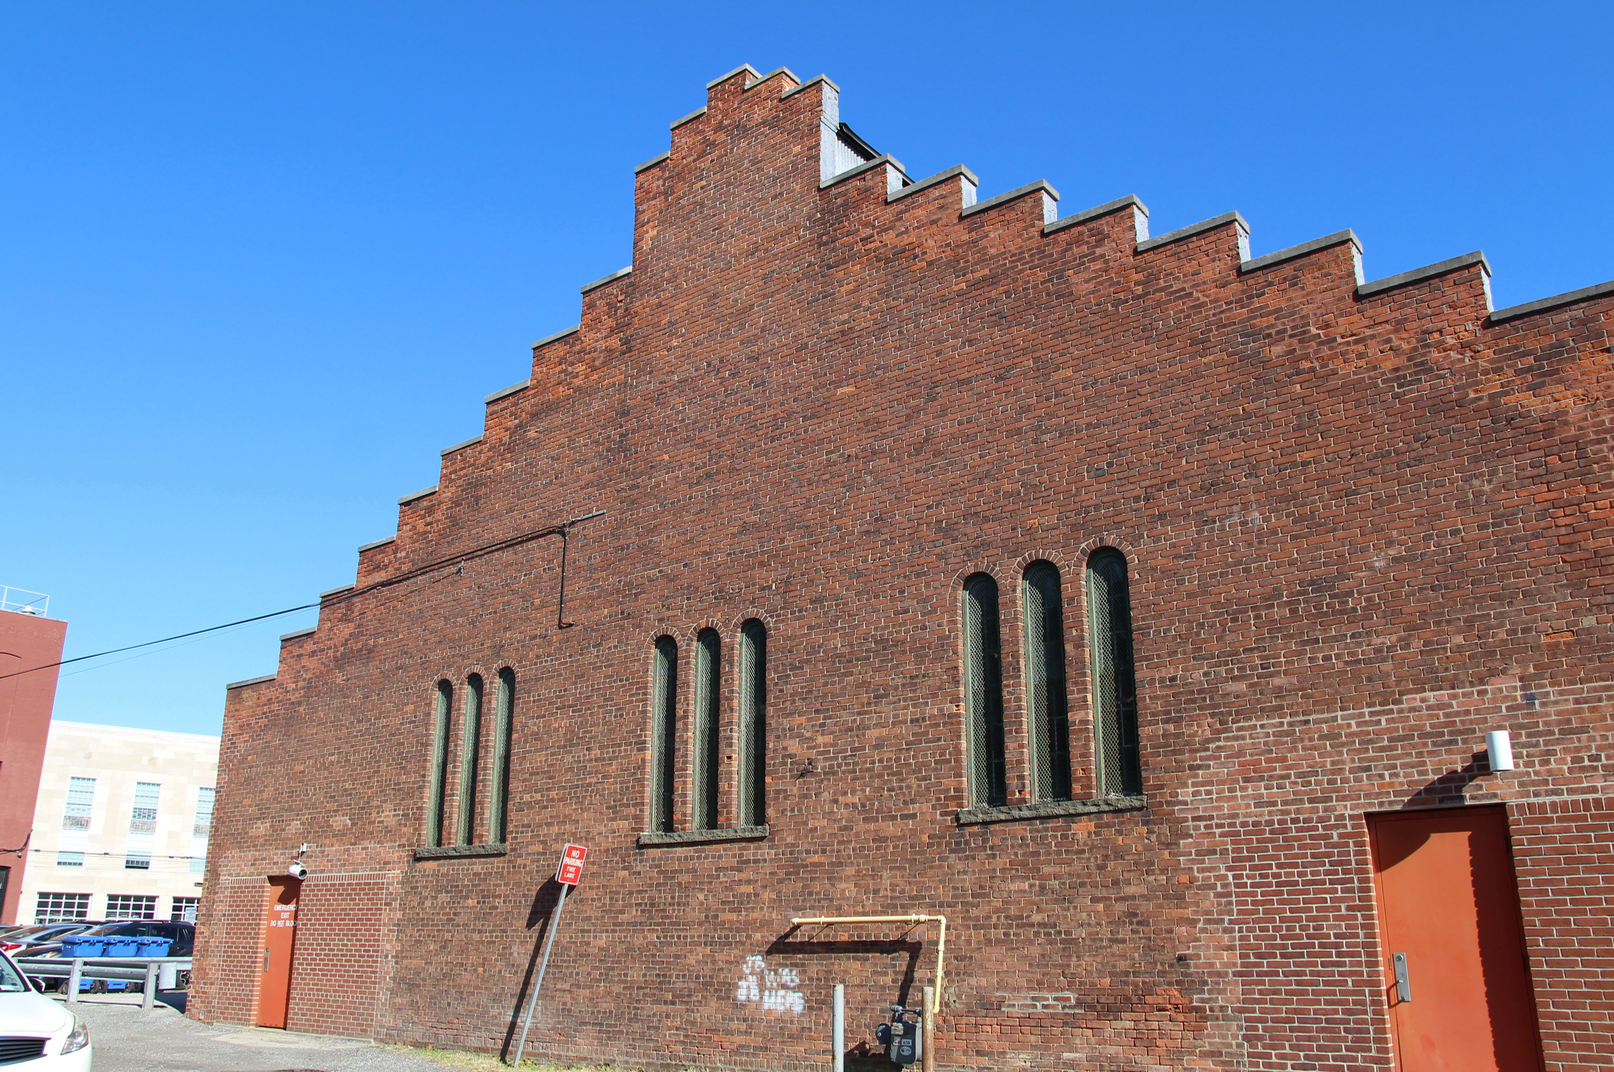 West wall of the historic Armory.